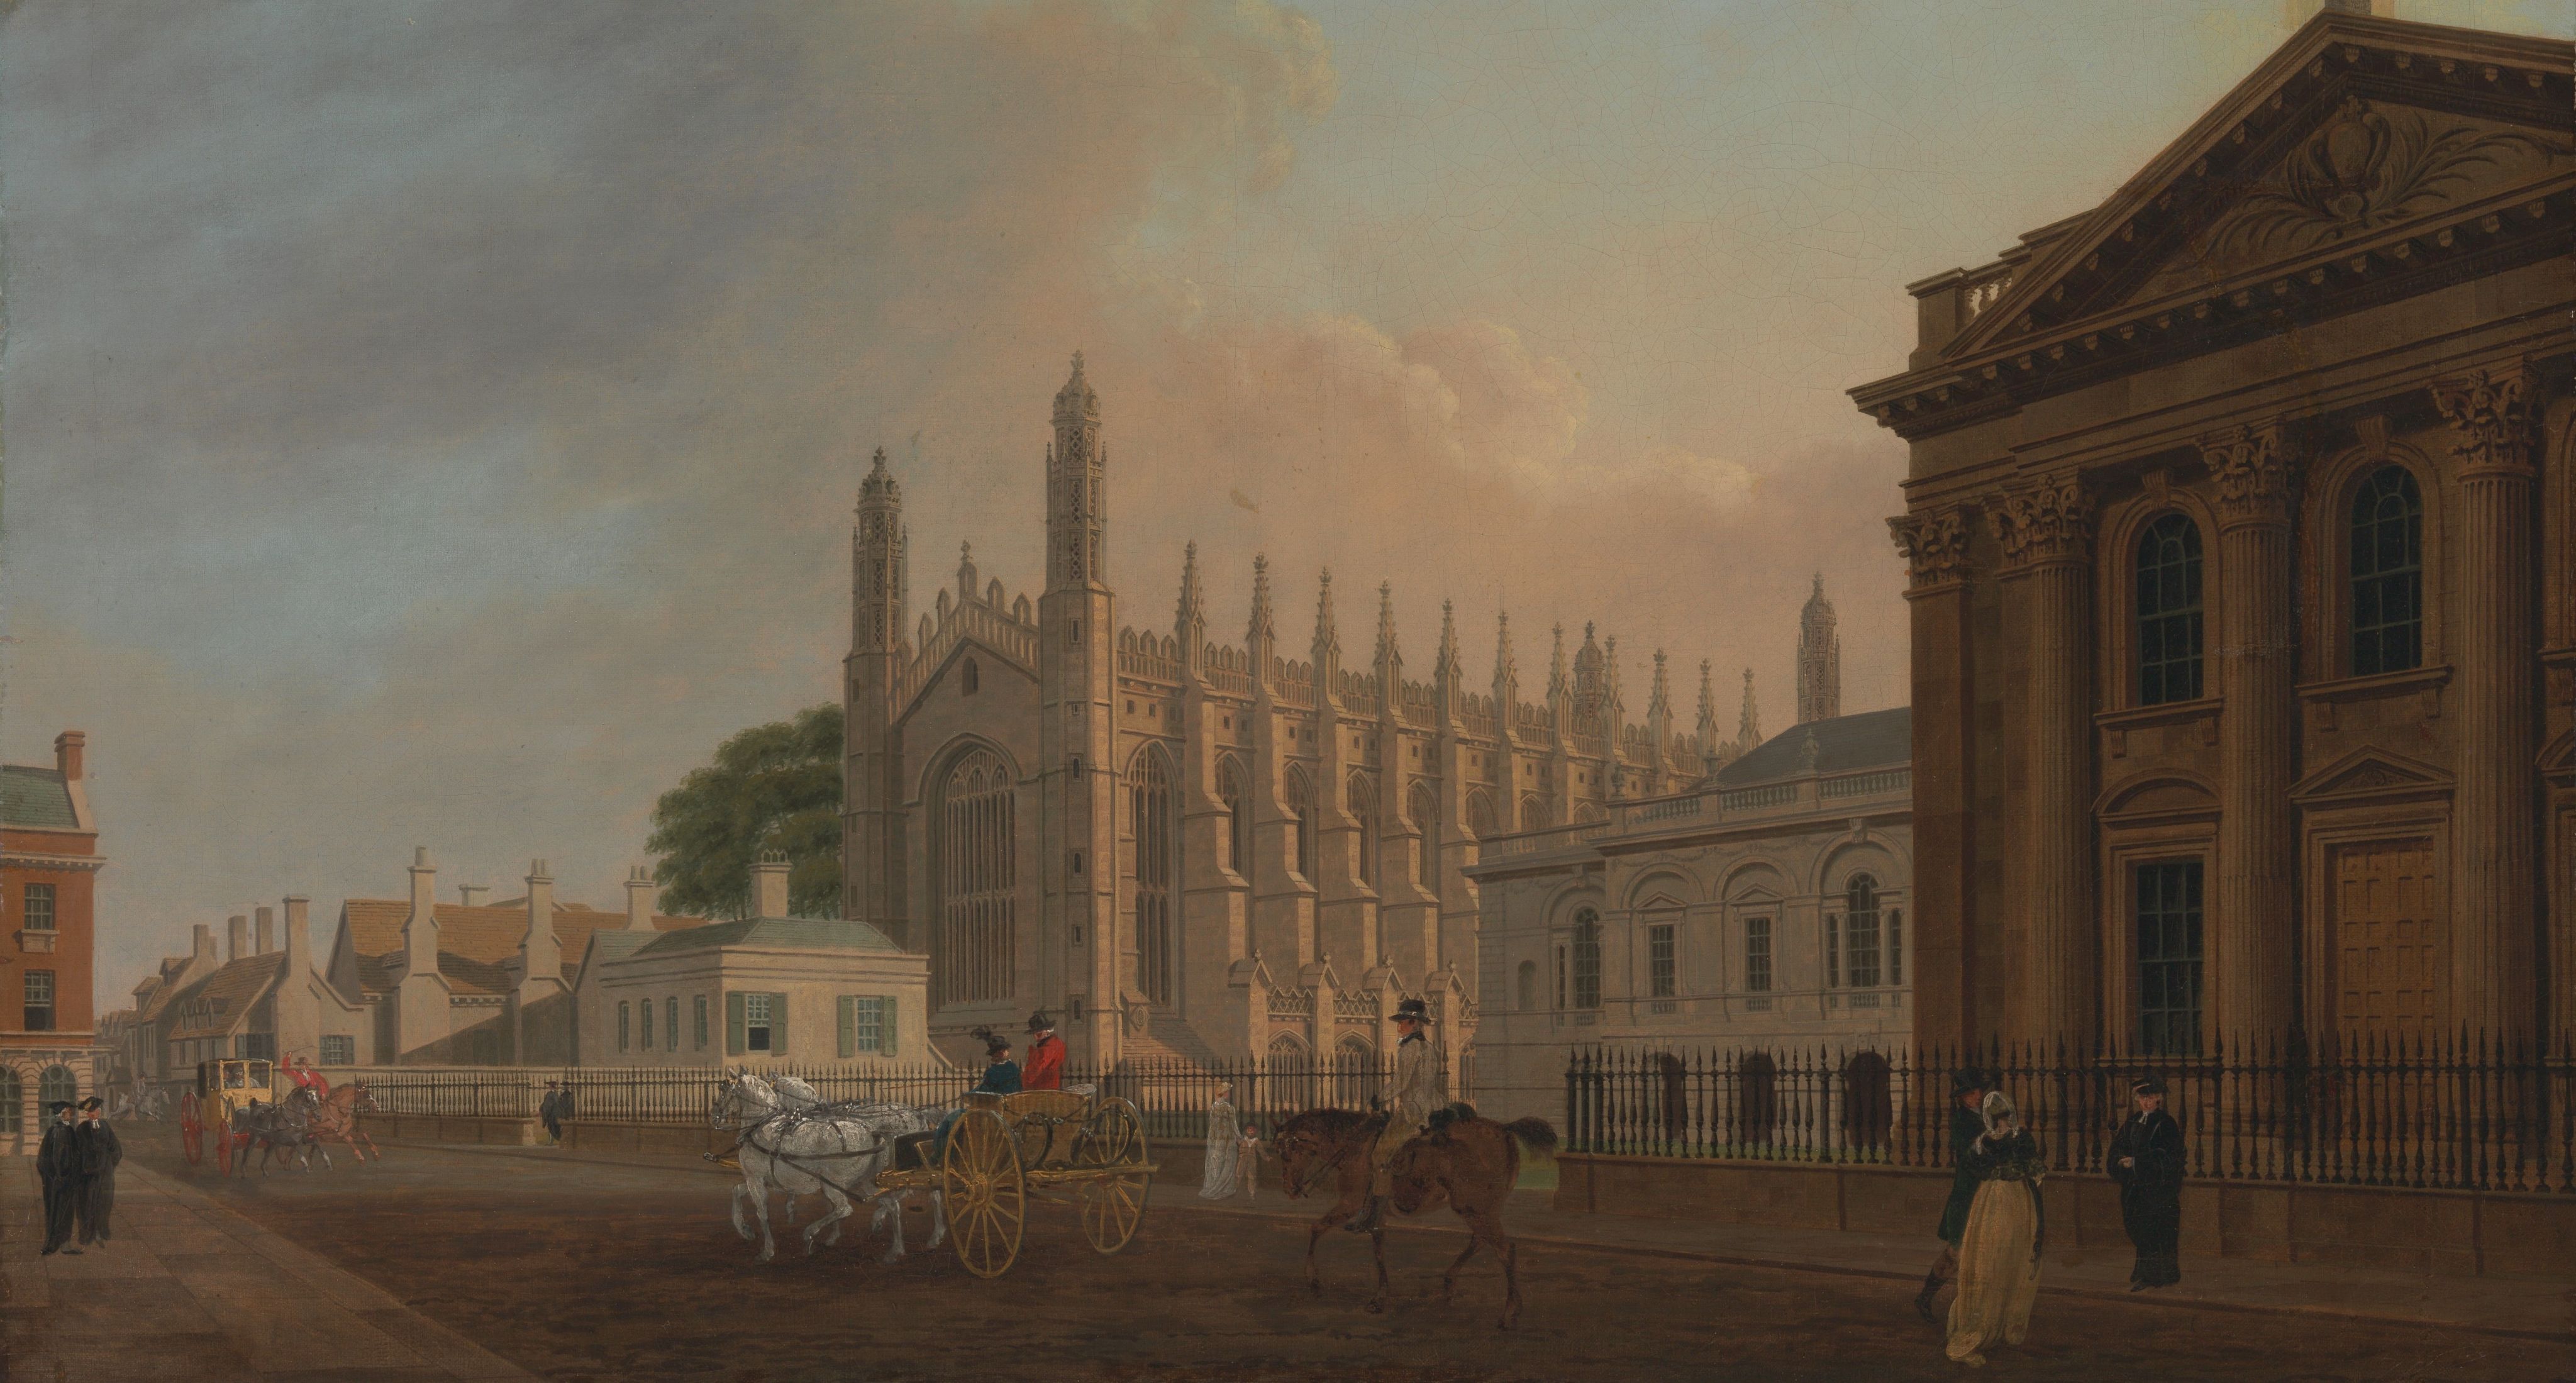 King's Parade, Cambridge (1798 -99) painting by Thomas Malton the Younger. Image: Yale Center for British Art, Paul Mellon Collection, B1996.22.25